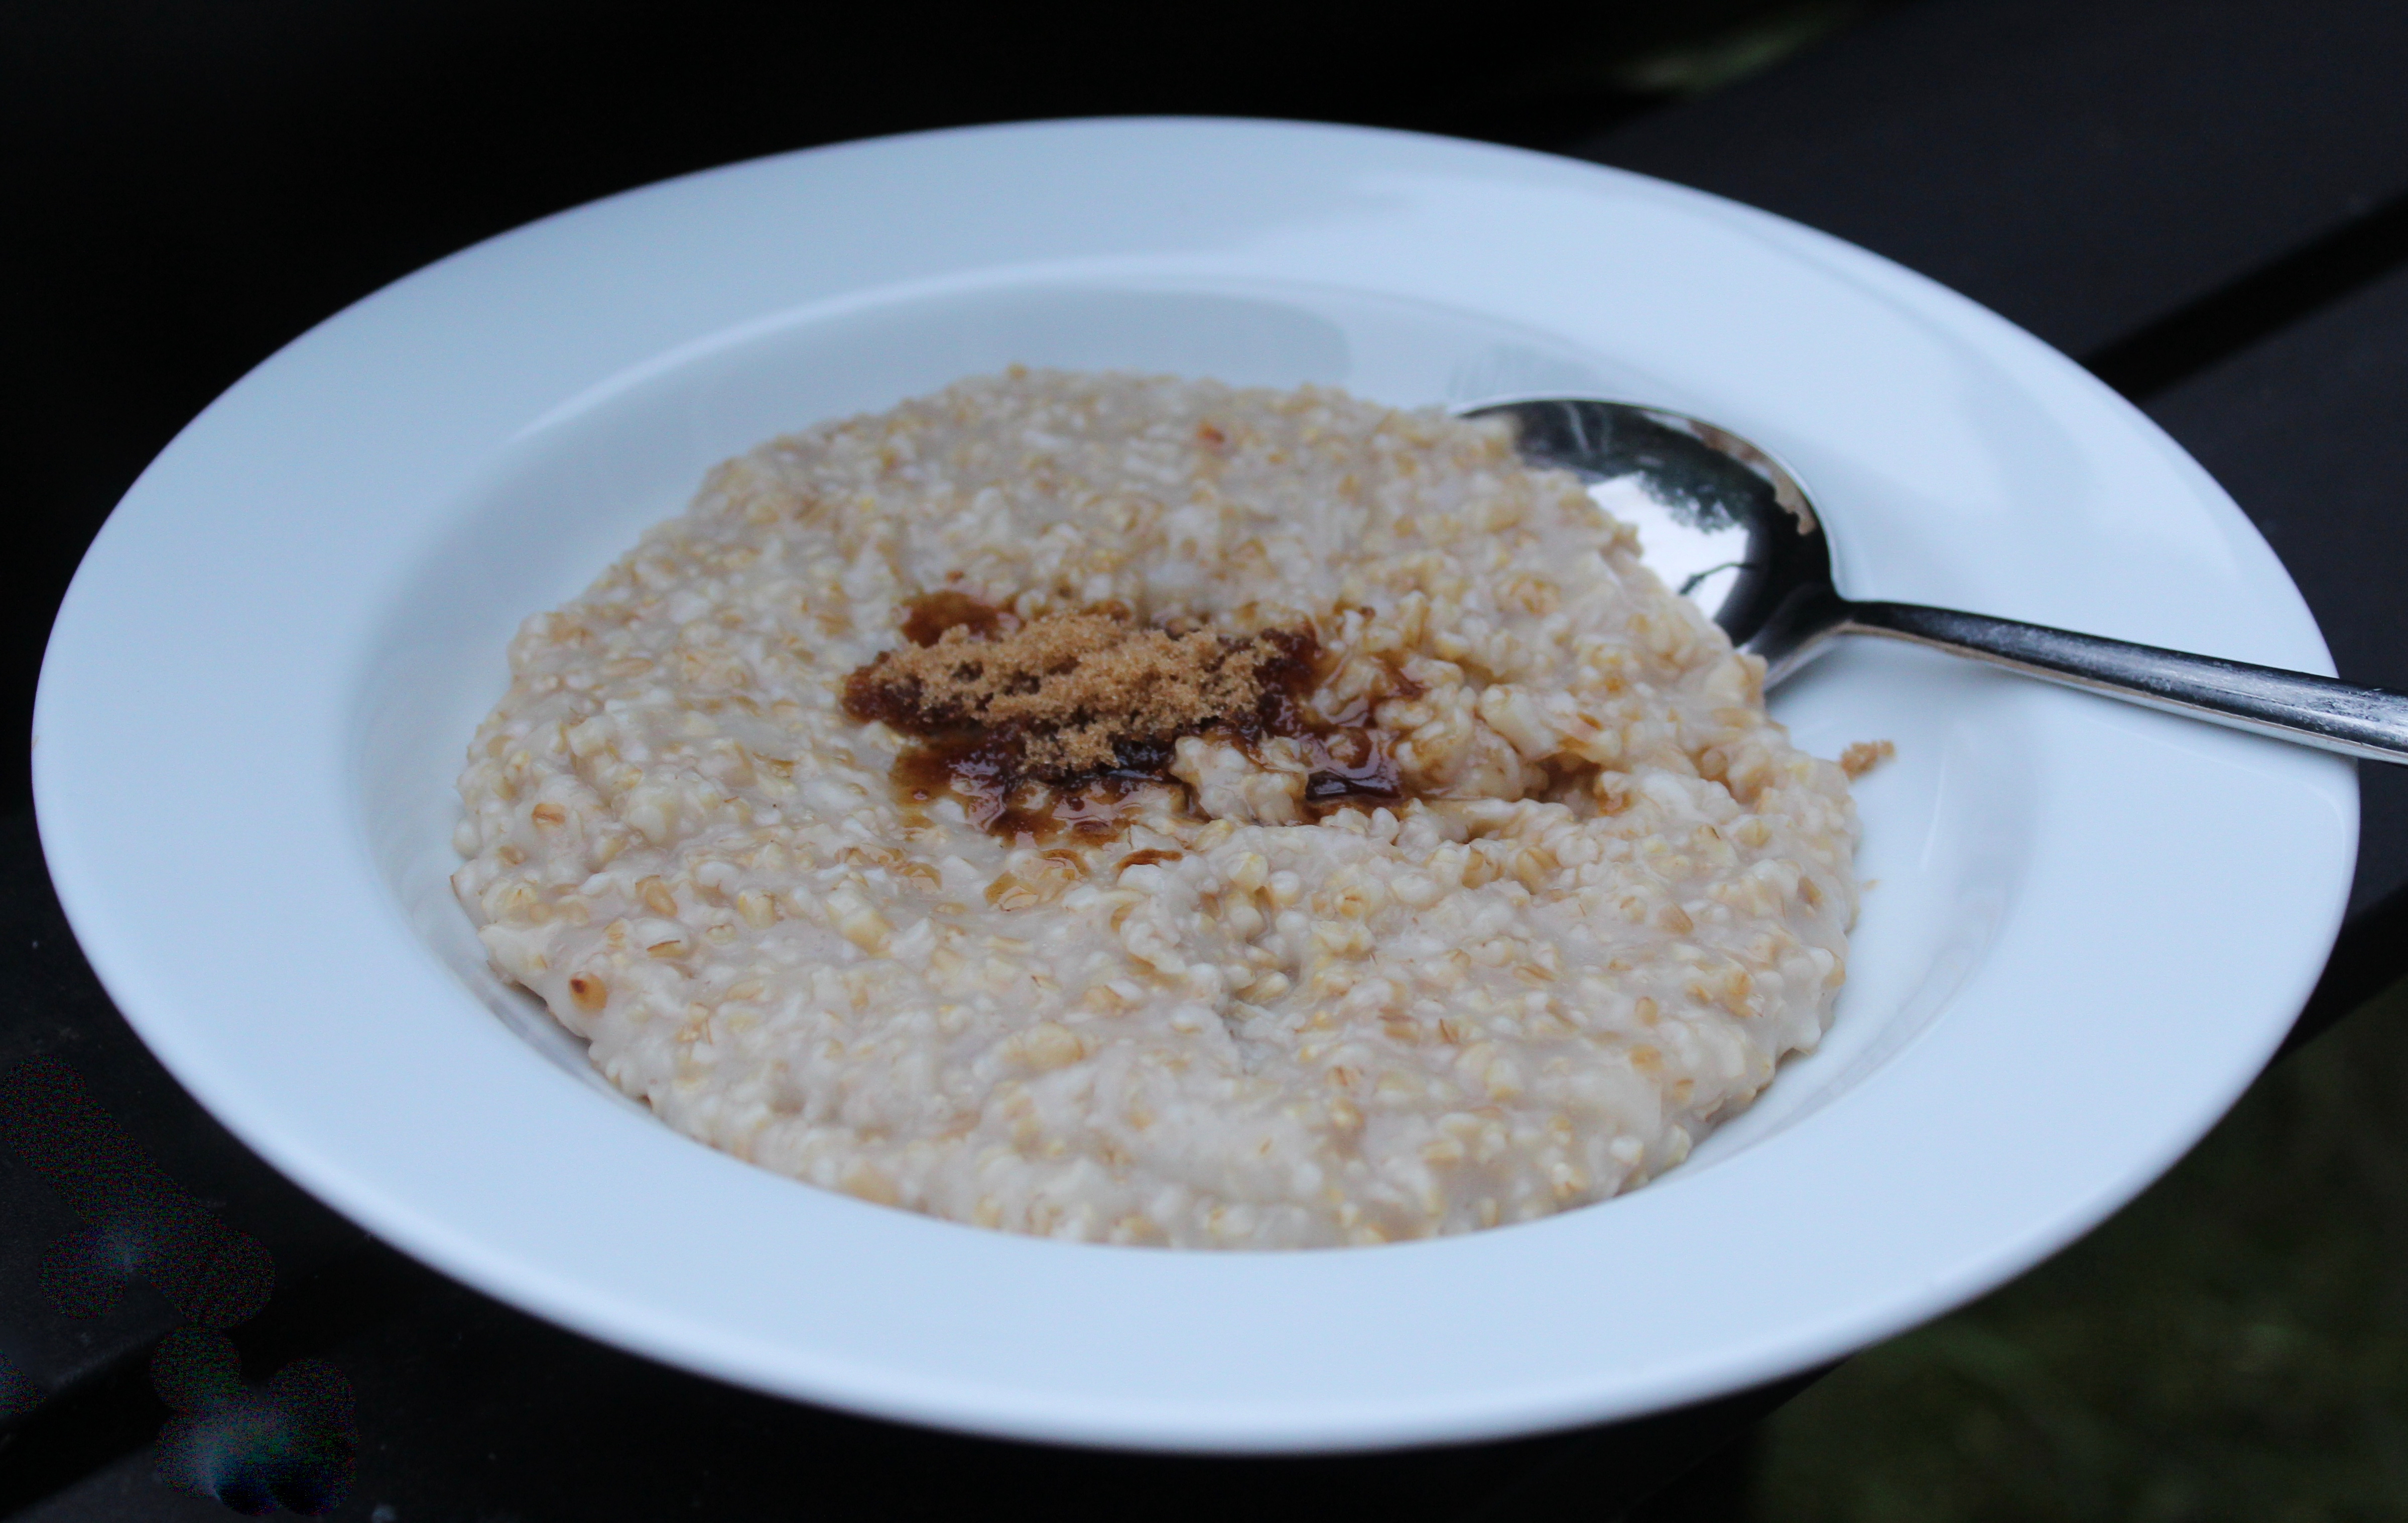 <p>"Steel-cut oats and the Instant Pot are two of my favorite 'discoveries' from the last 10 years," says MoMosGoGo. "Top with ground flax seed, hemp seed, cinnamon, fruit, honey, syrup, vanilla extract, nut butter, etc."</p>
                          